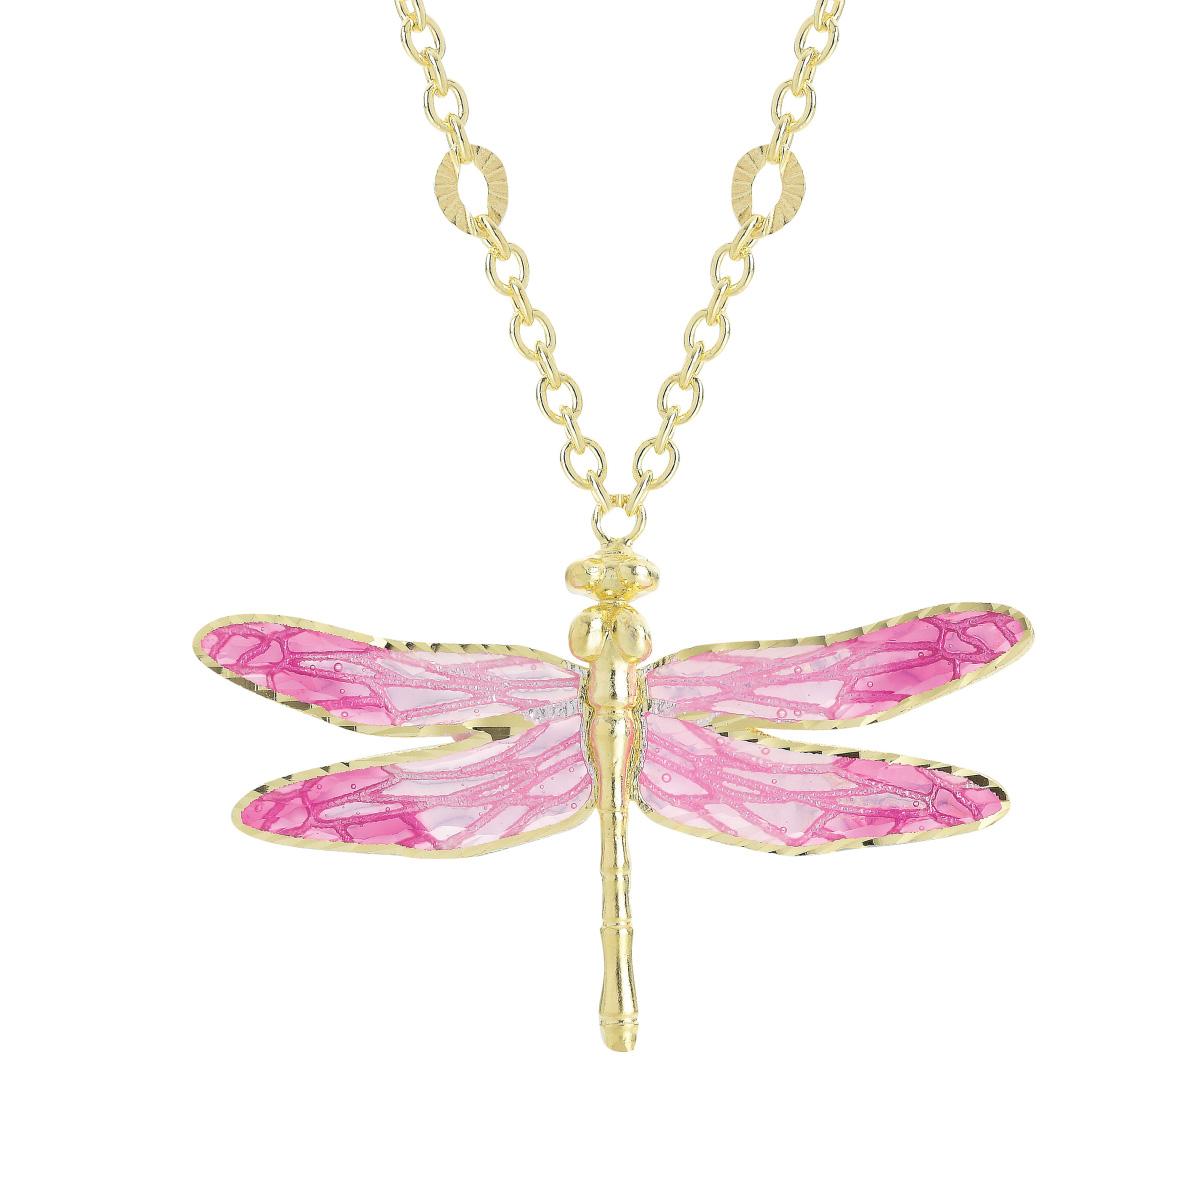 Large enameled dragonfly silver necklace